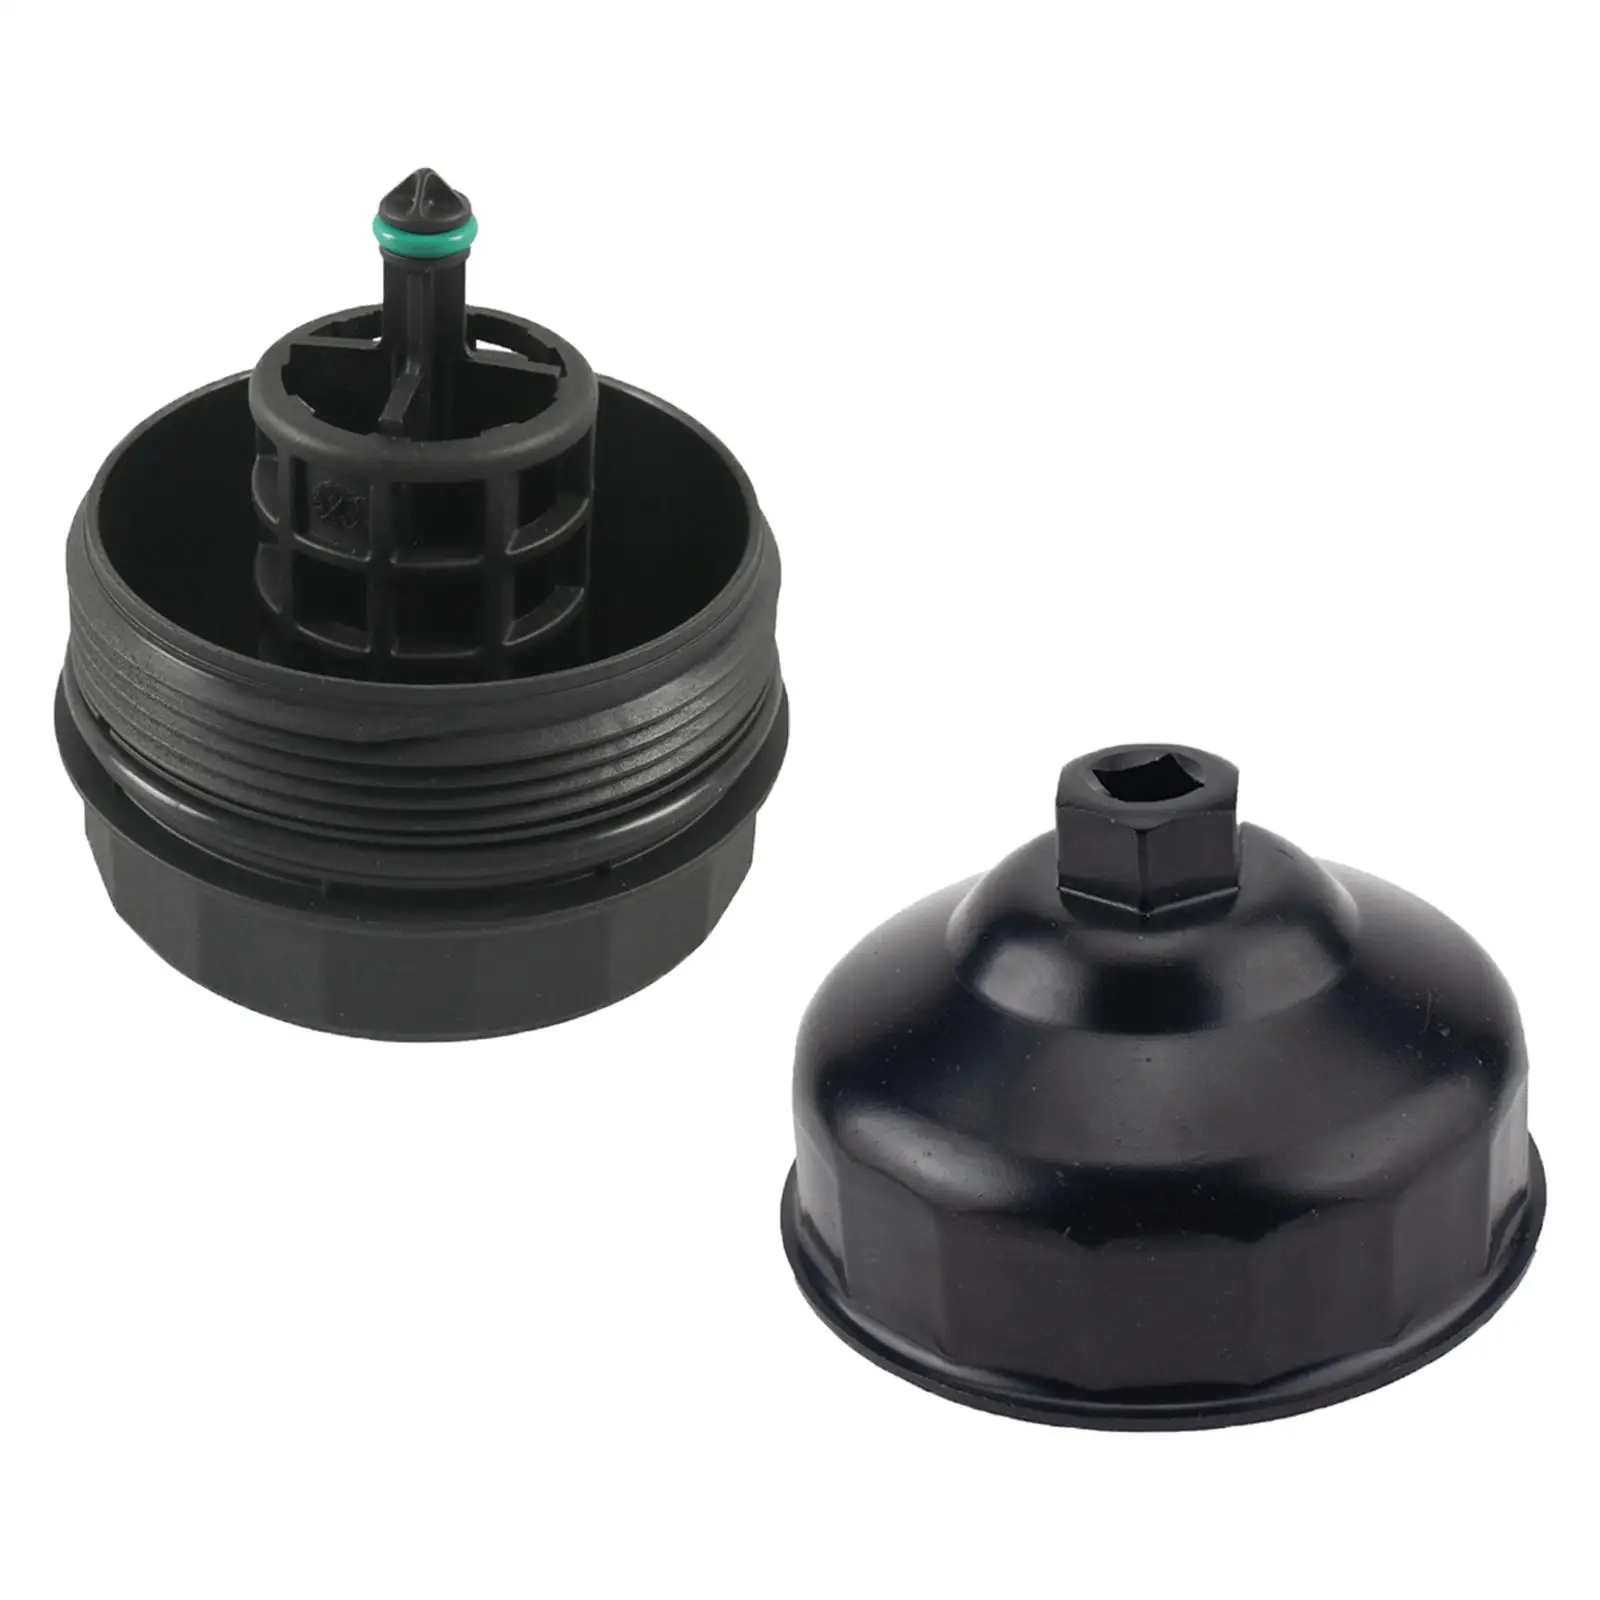 Oil Filter Housing Cover Caps 11427525334 Replace Fits for BMW 525Xi 528i 328i 328i 328Xi Z4 335IS 335Xi